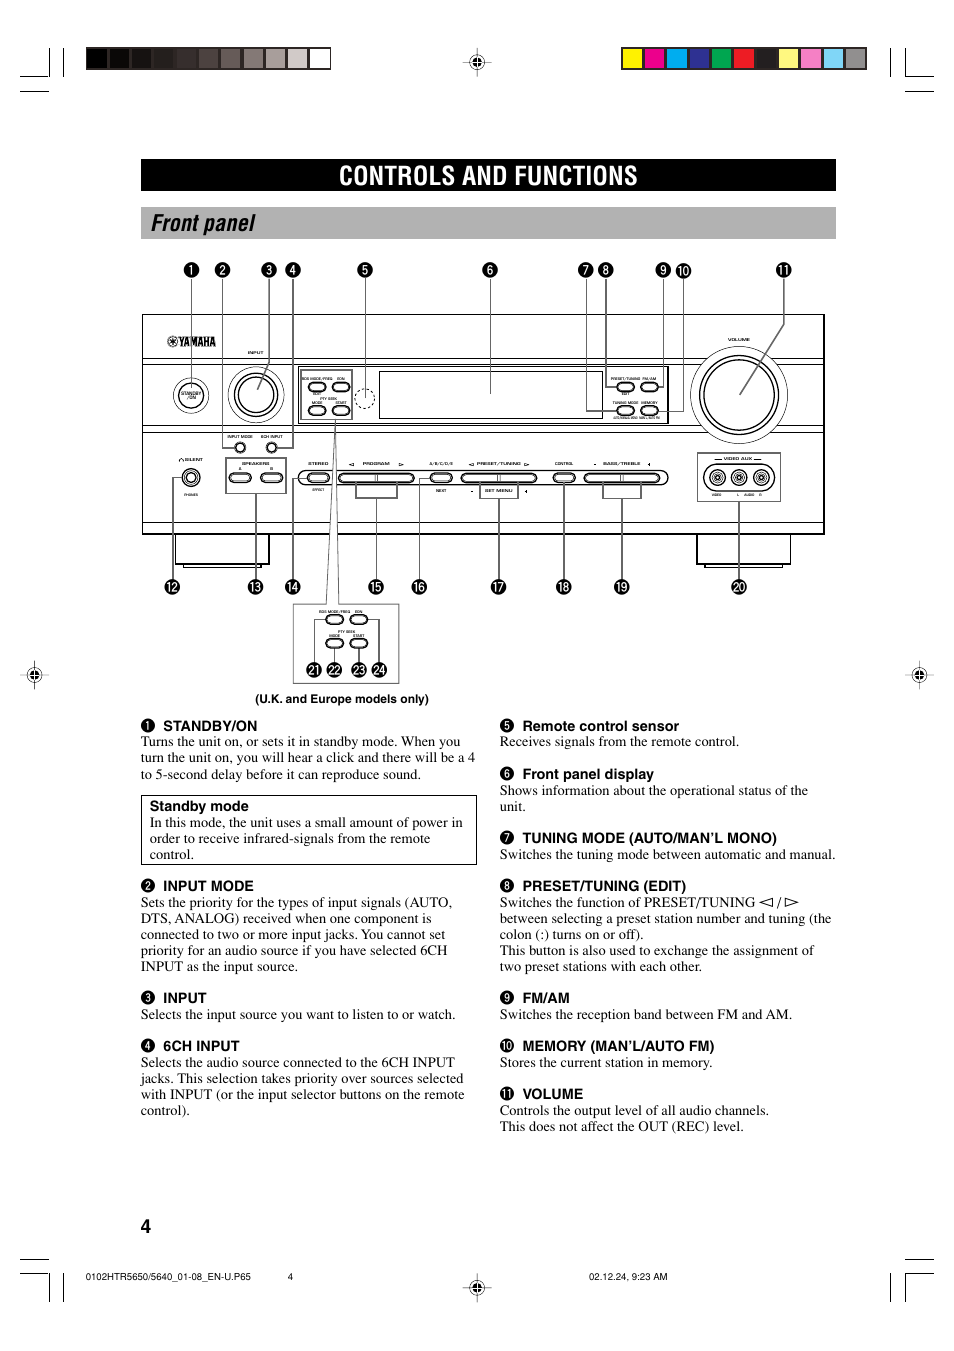 Controls and functions, Front panel, Wr y o | Yamaha HTR 5650 User